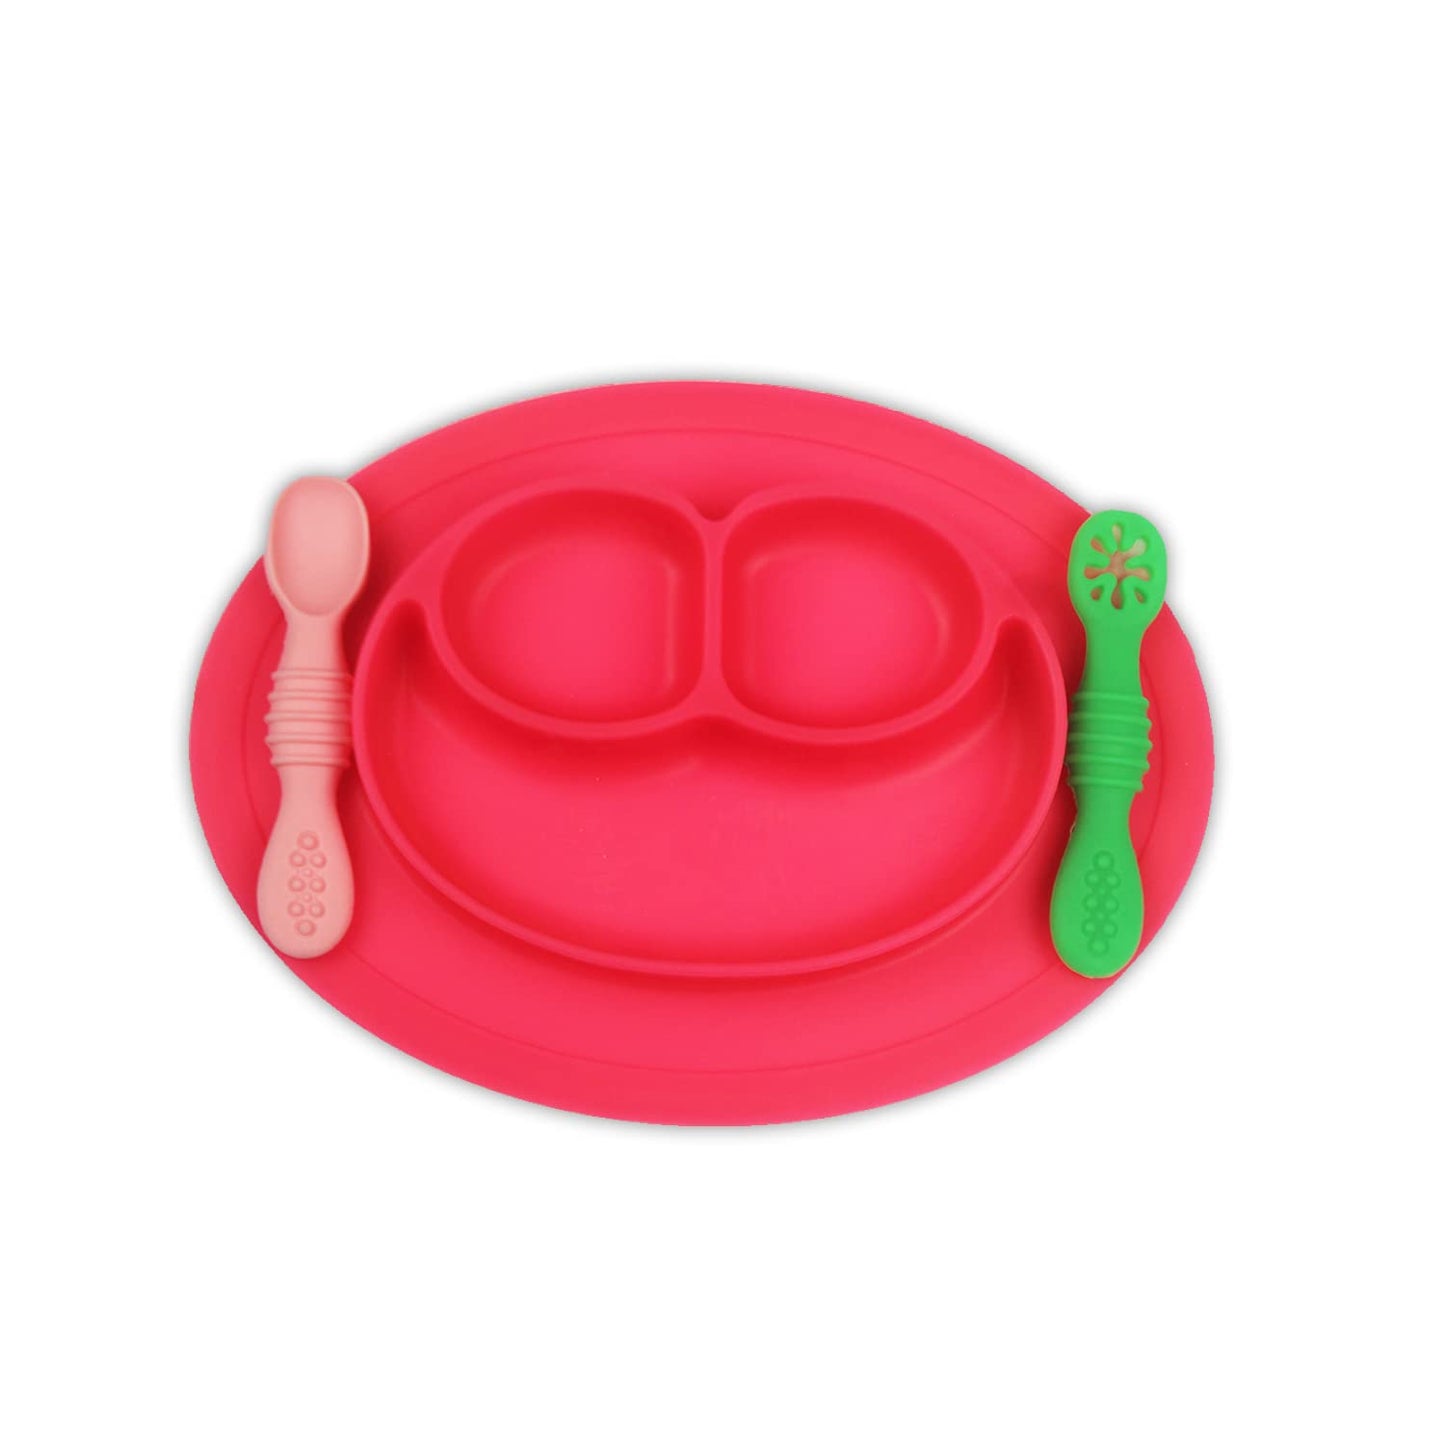 Chanak Baby Food Oval Tray - Silicon Plate with Multiple Compartments & Two Spoons (Pink) - chanak